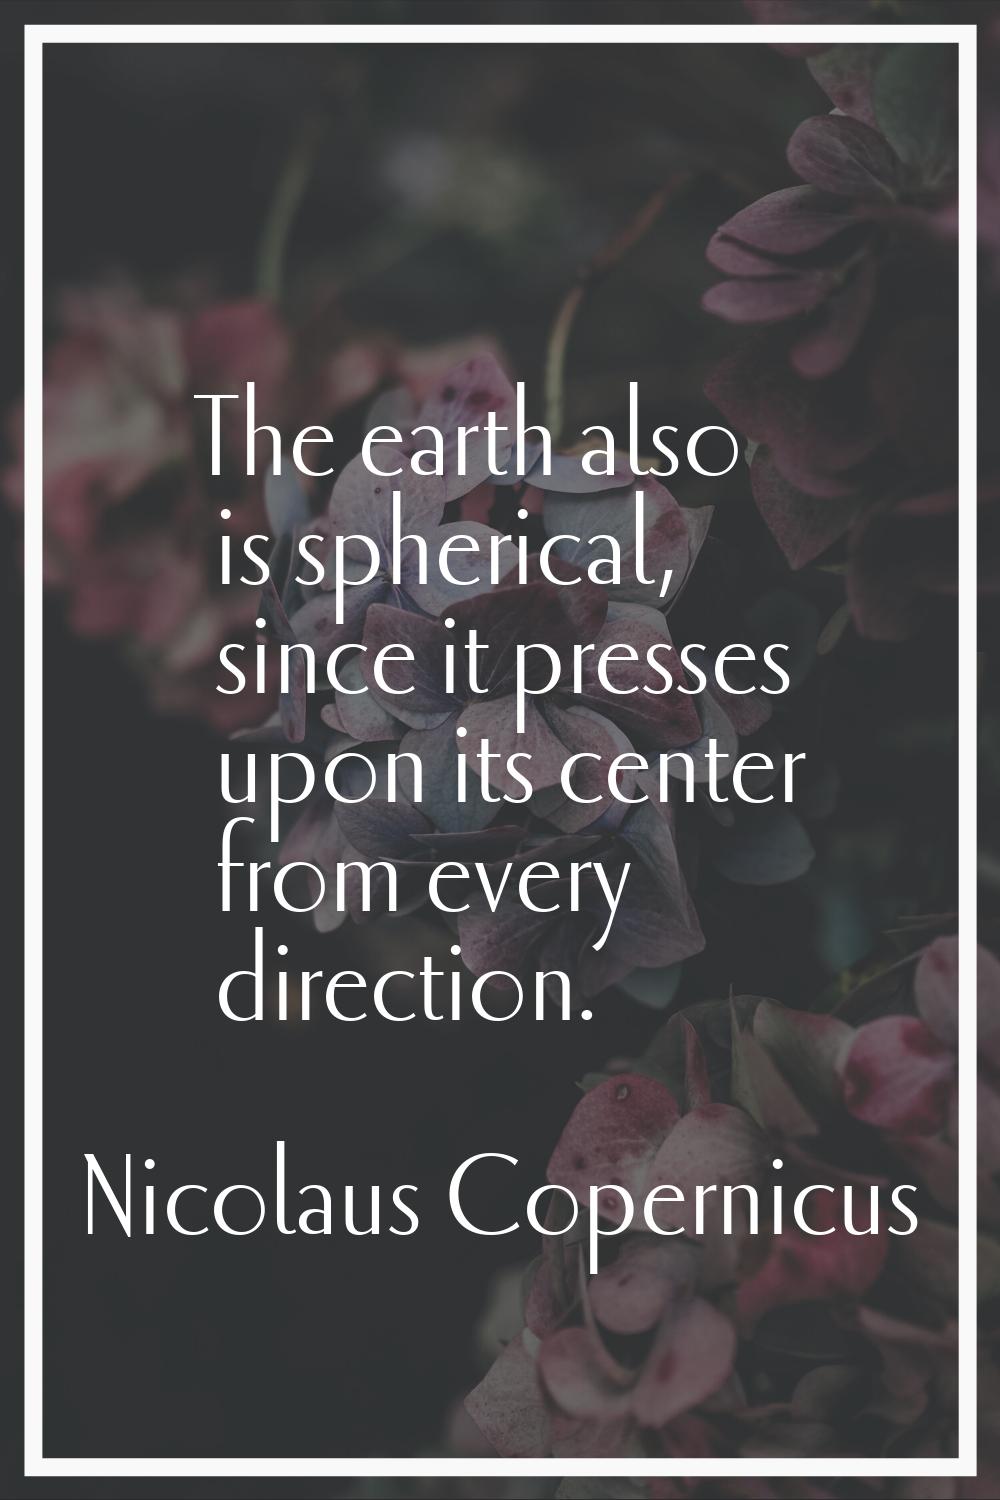 The earth also is spherical, since it presses upon its center from every direction.